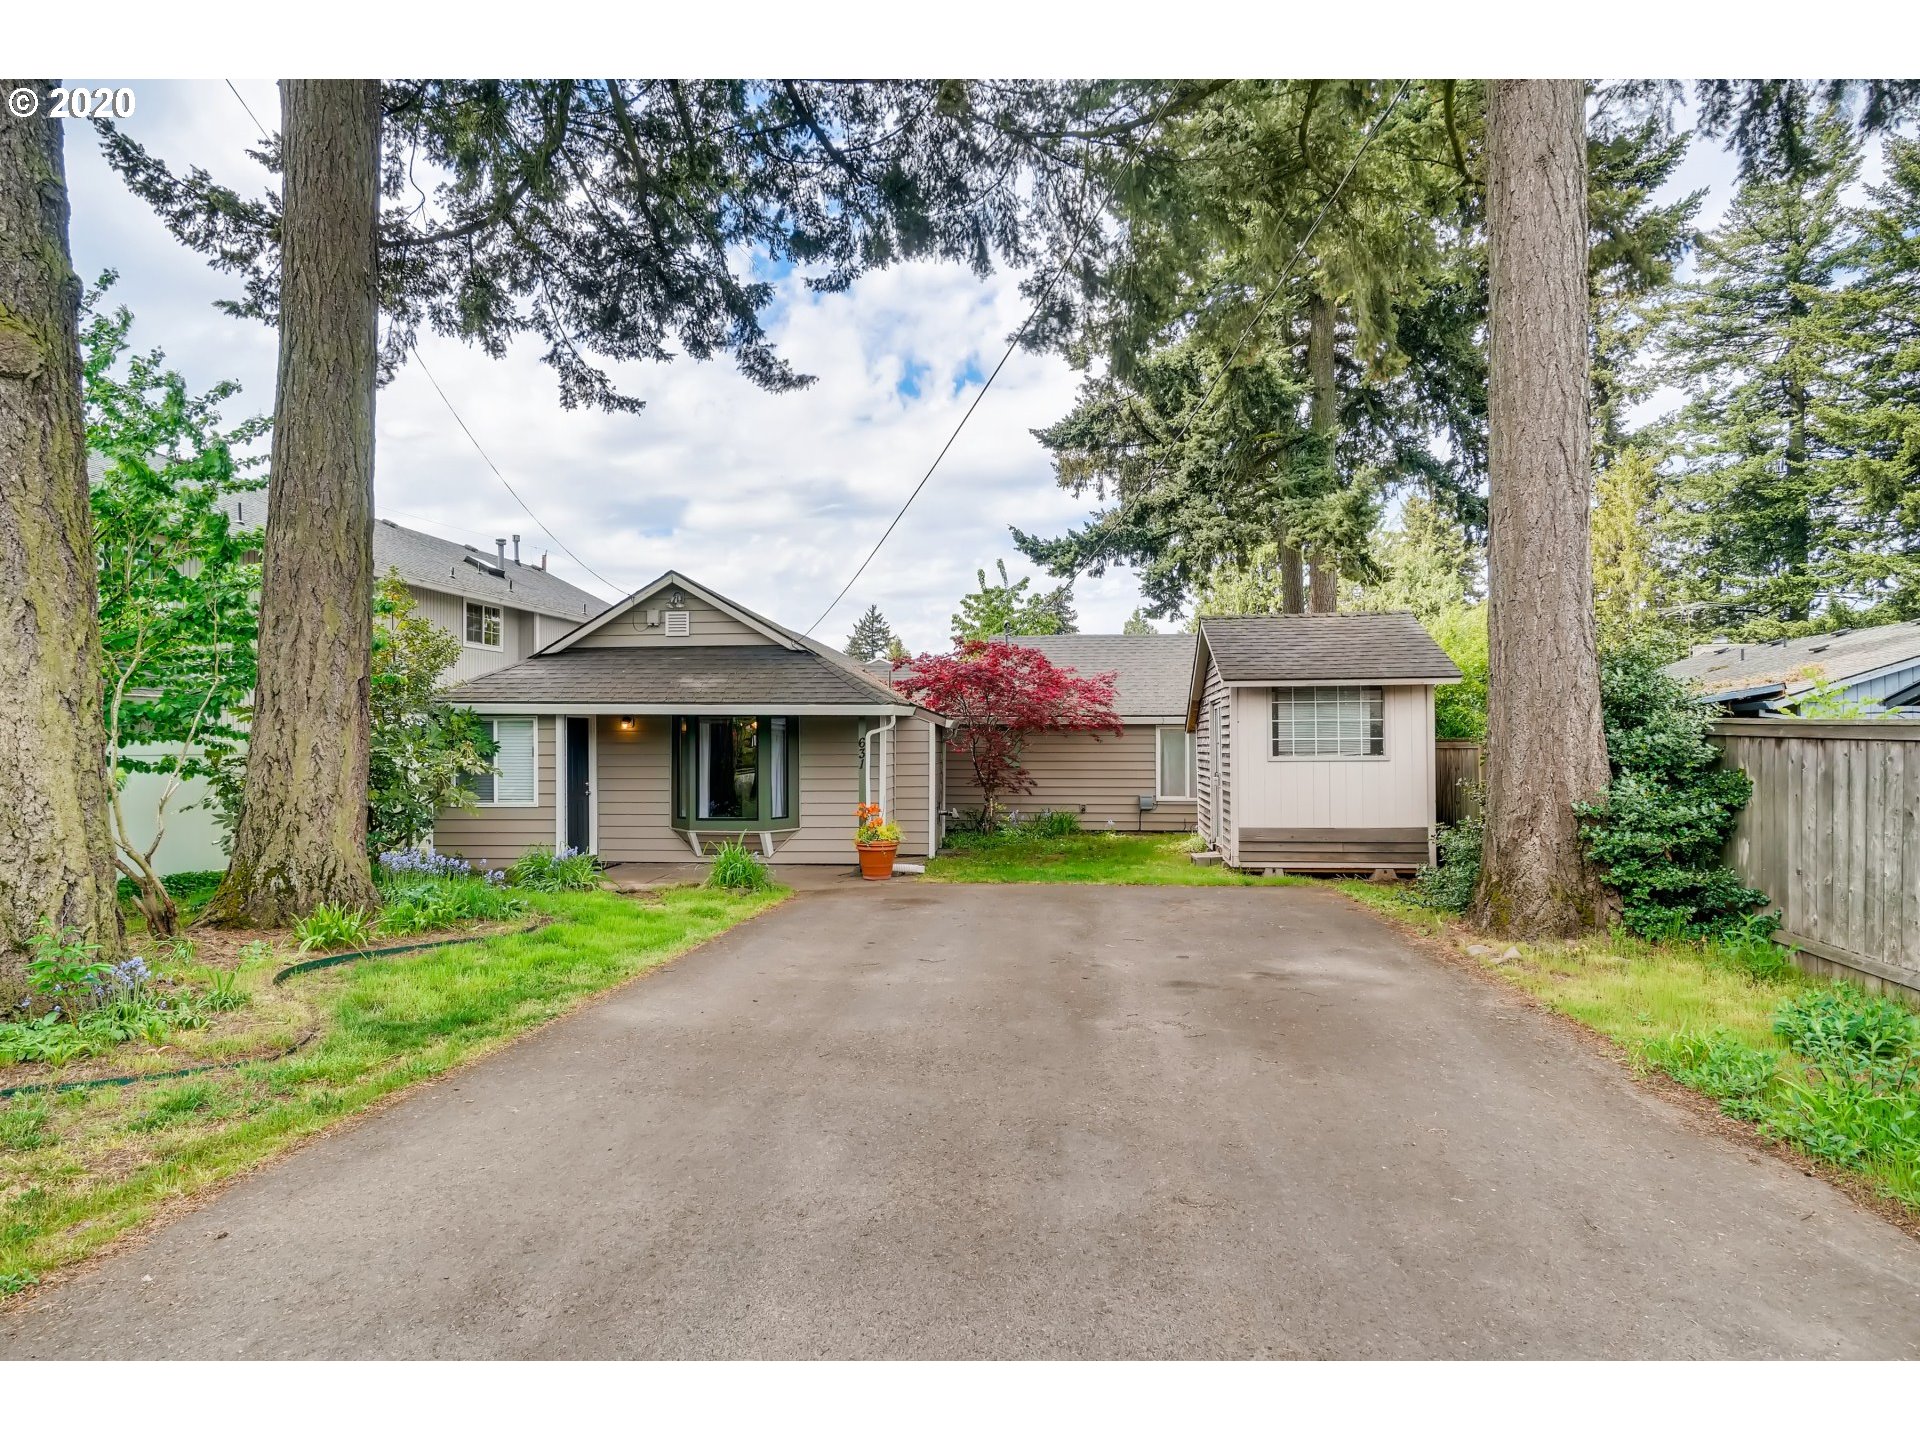 631 SE 119TH AVE (1 of 29)